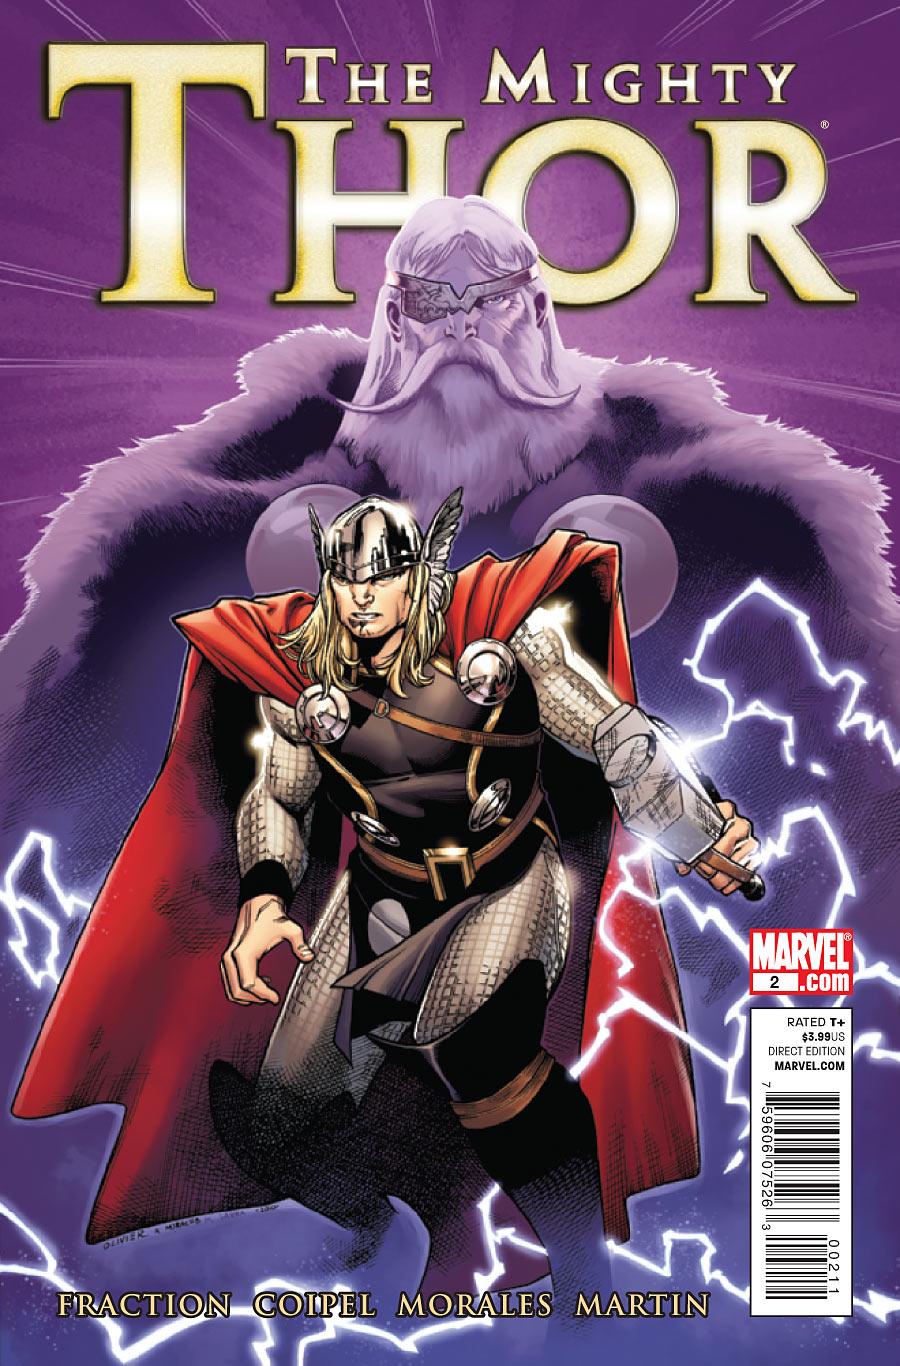 The Mighty Thor Vol. 1 #2